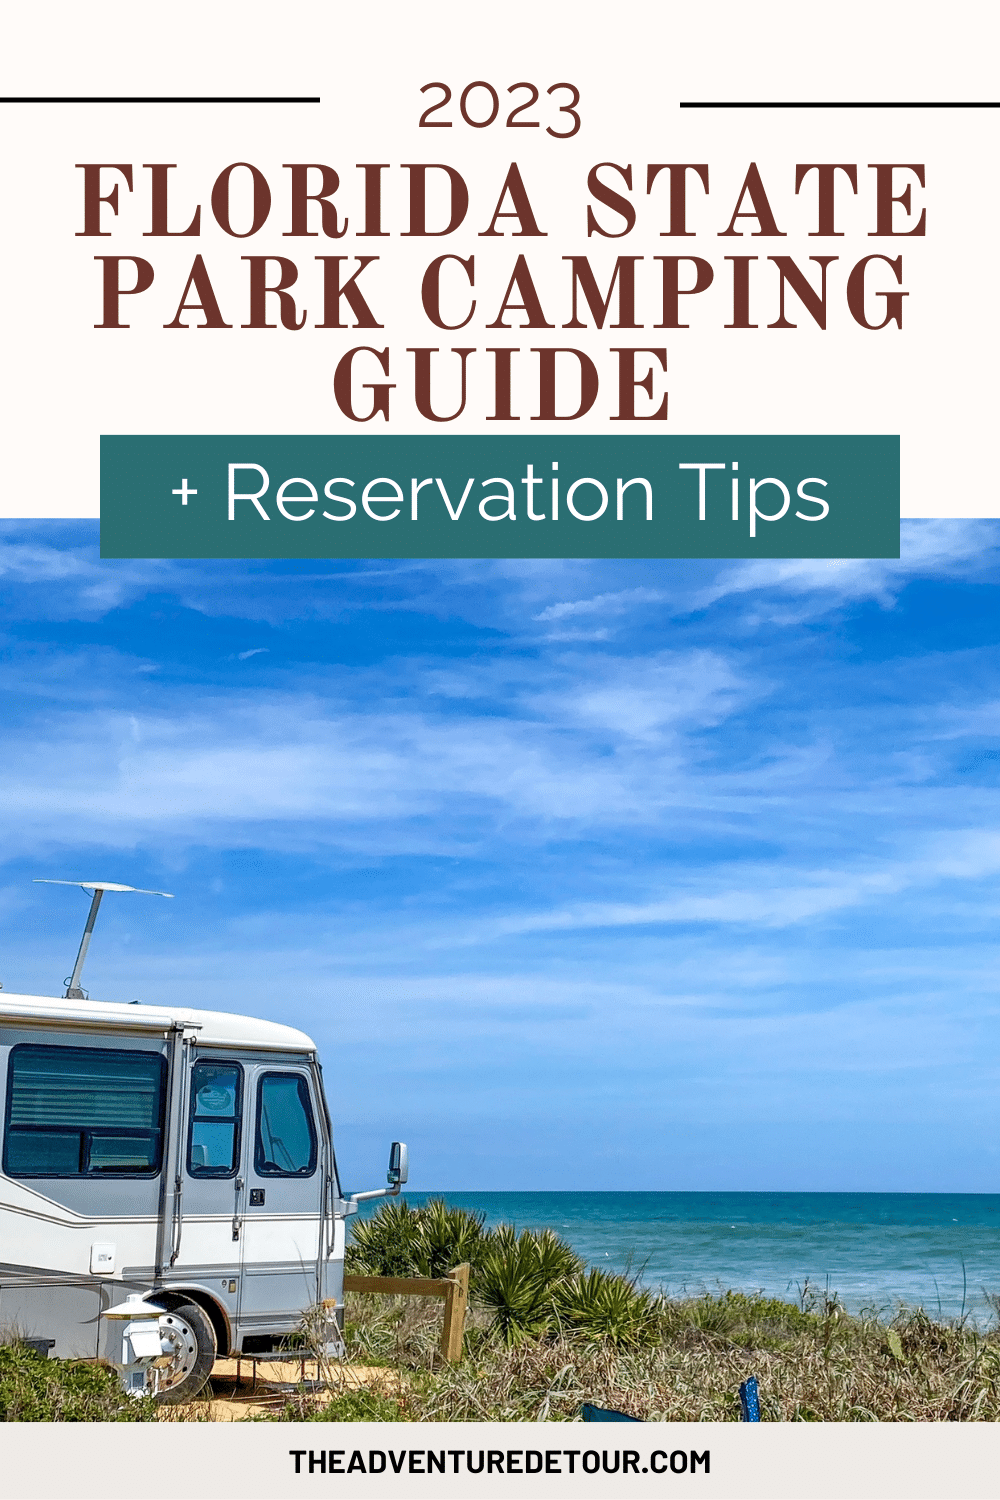 RV Camping On The Beach - Florida State Park Camping Guide